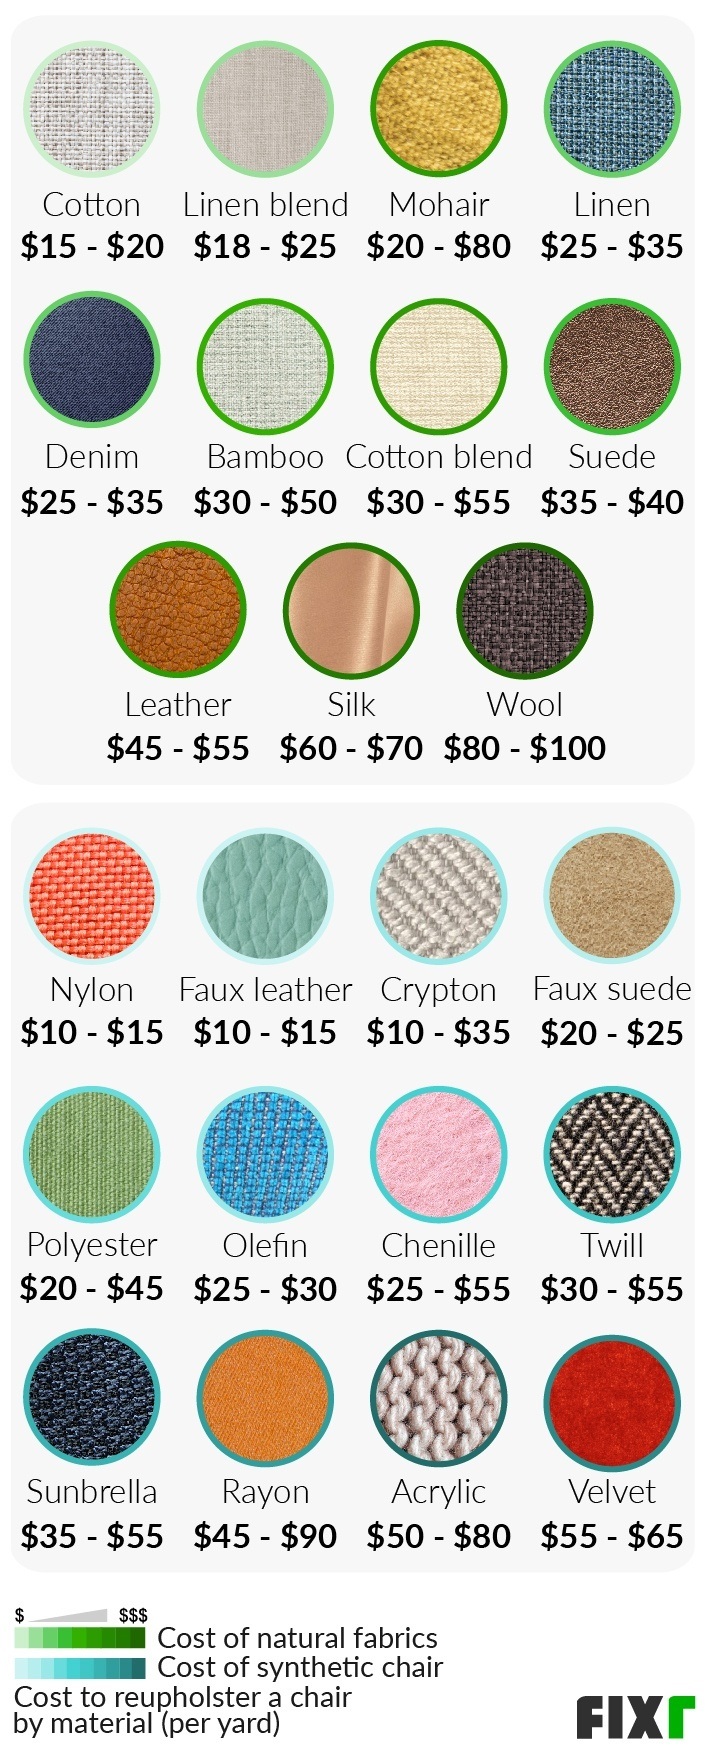 Cost per Yard of Natural and Synthetic Fabrics to Reupholster a Chair by Material: Crypton, Mohair, Denim, Chenille, Sunbrella, Leather, Velvet...